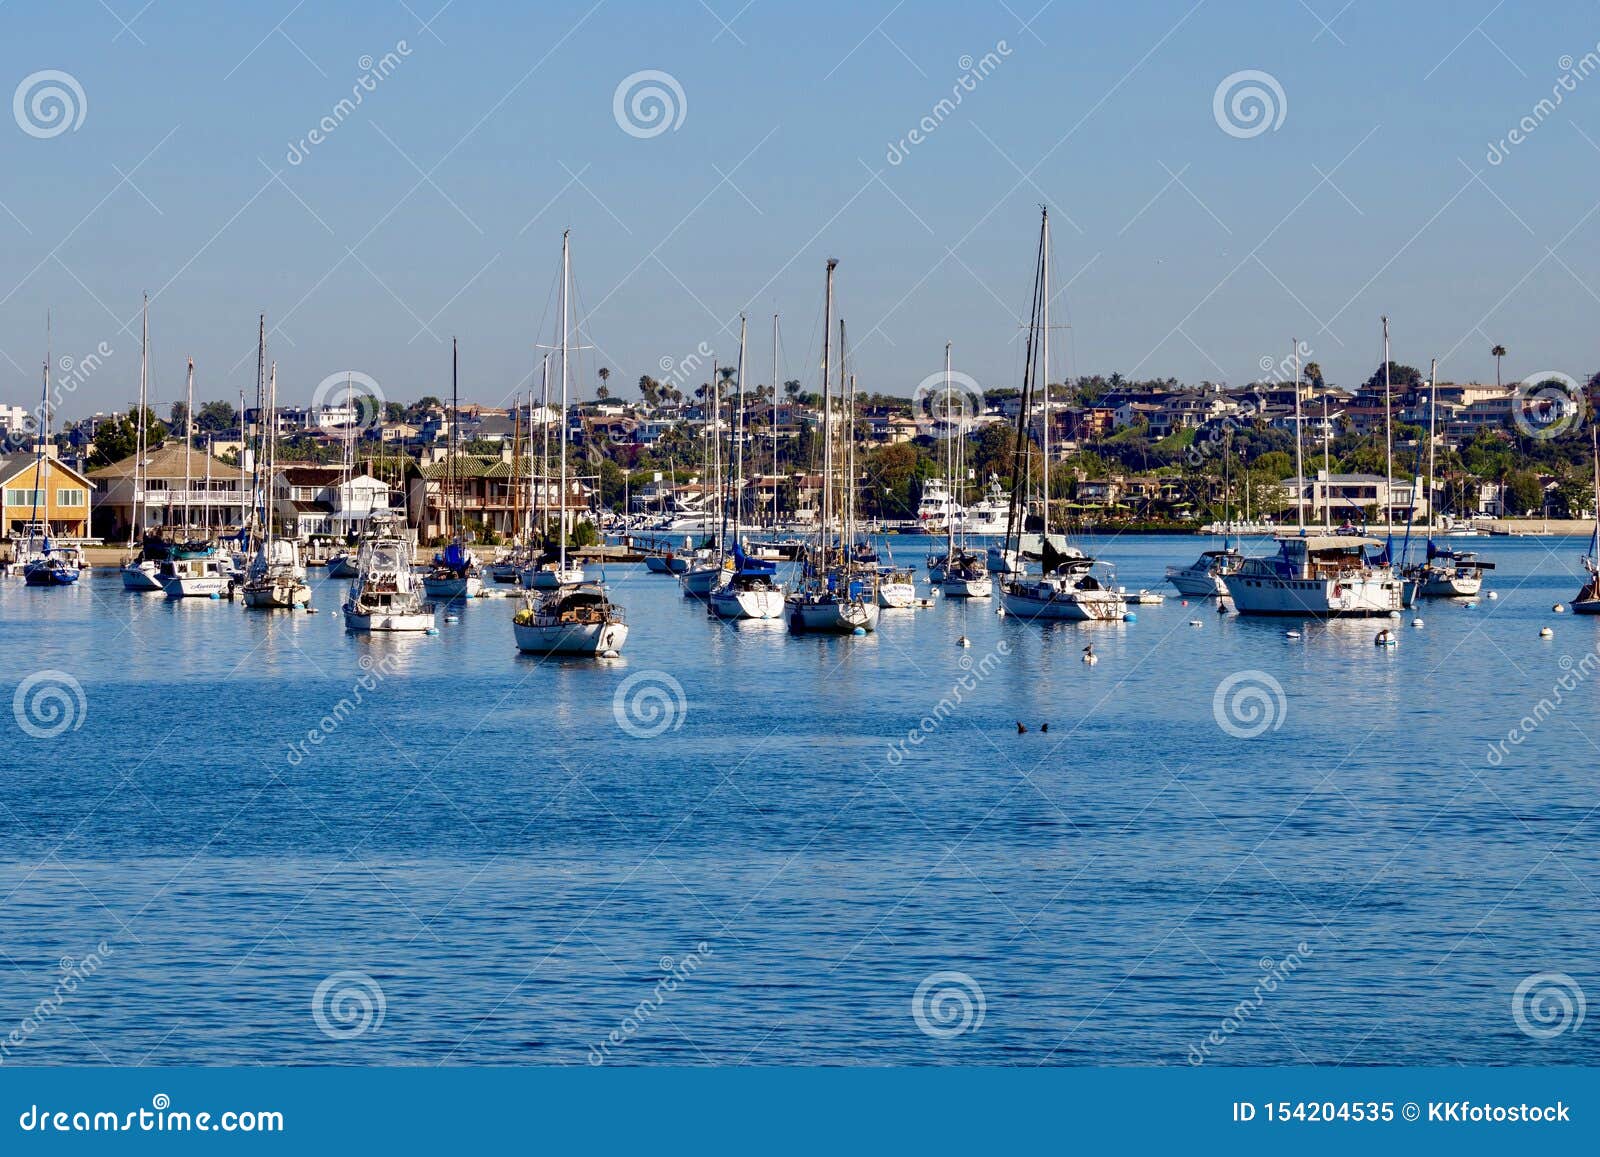 Sailboats Moored in Newport Beach Harbor Editorial Image - Image of ...